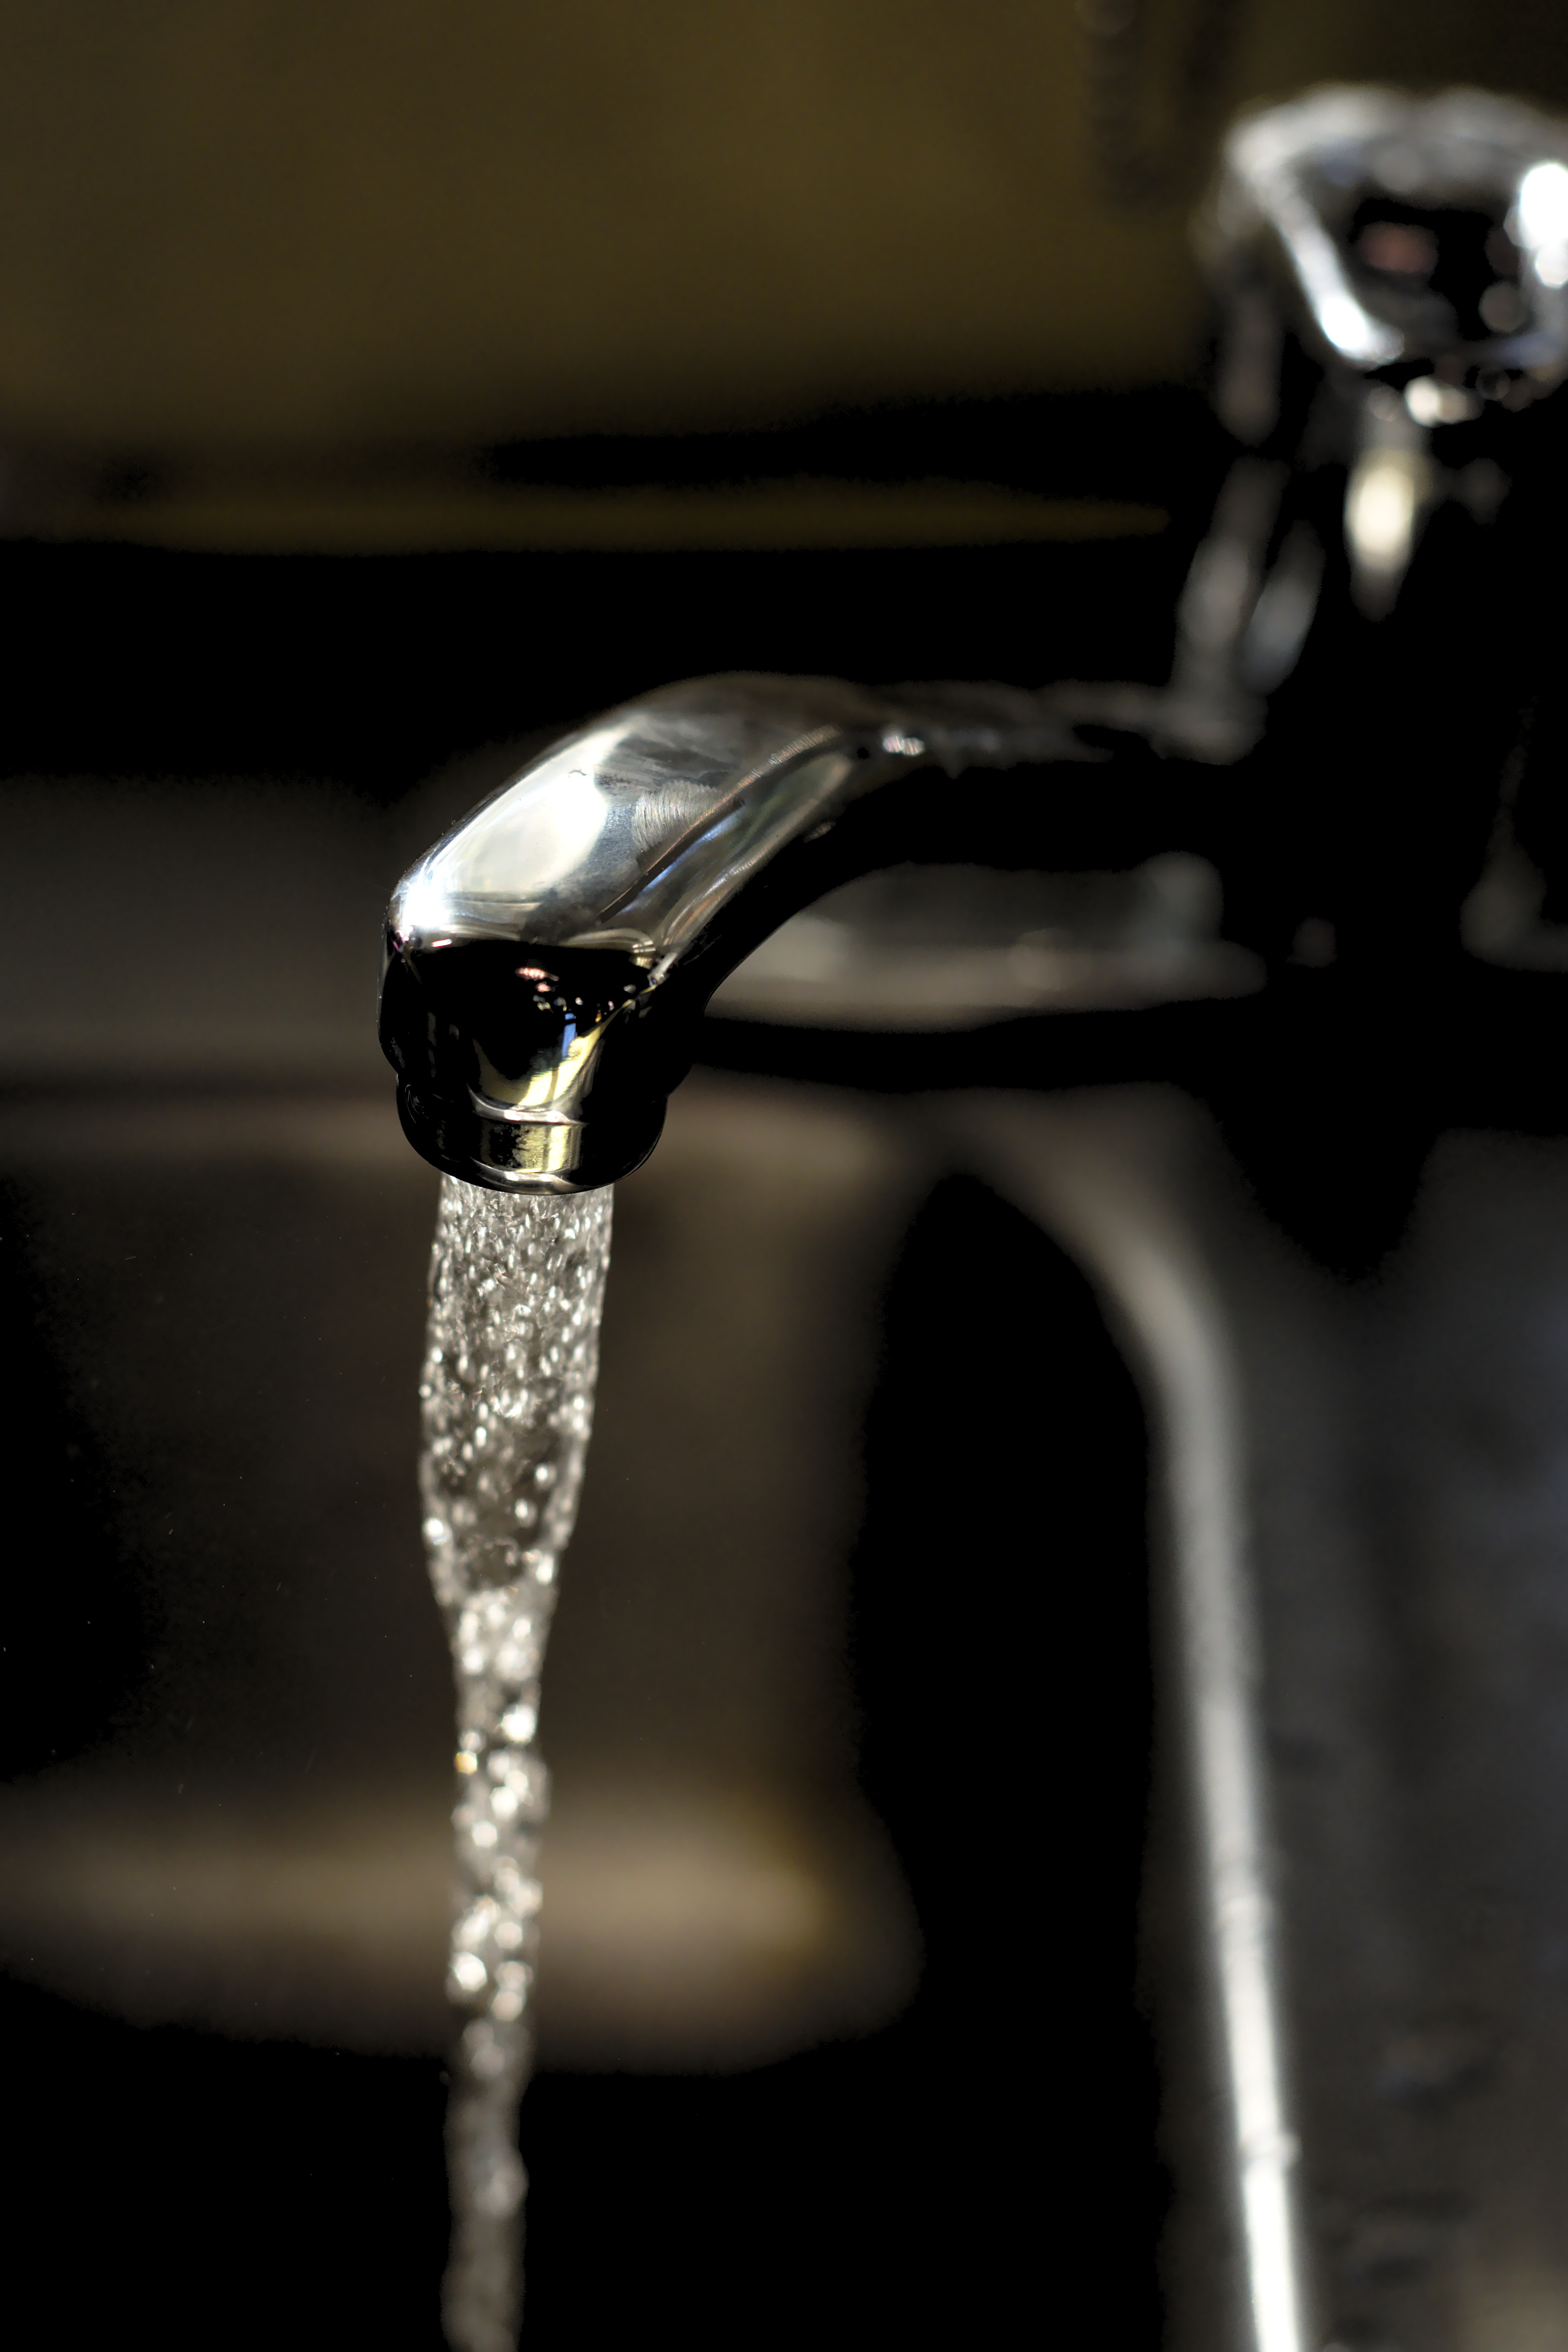 Residents told to boil water